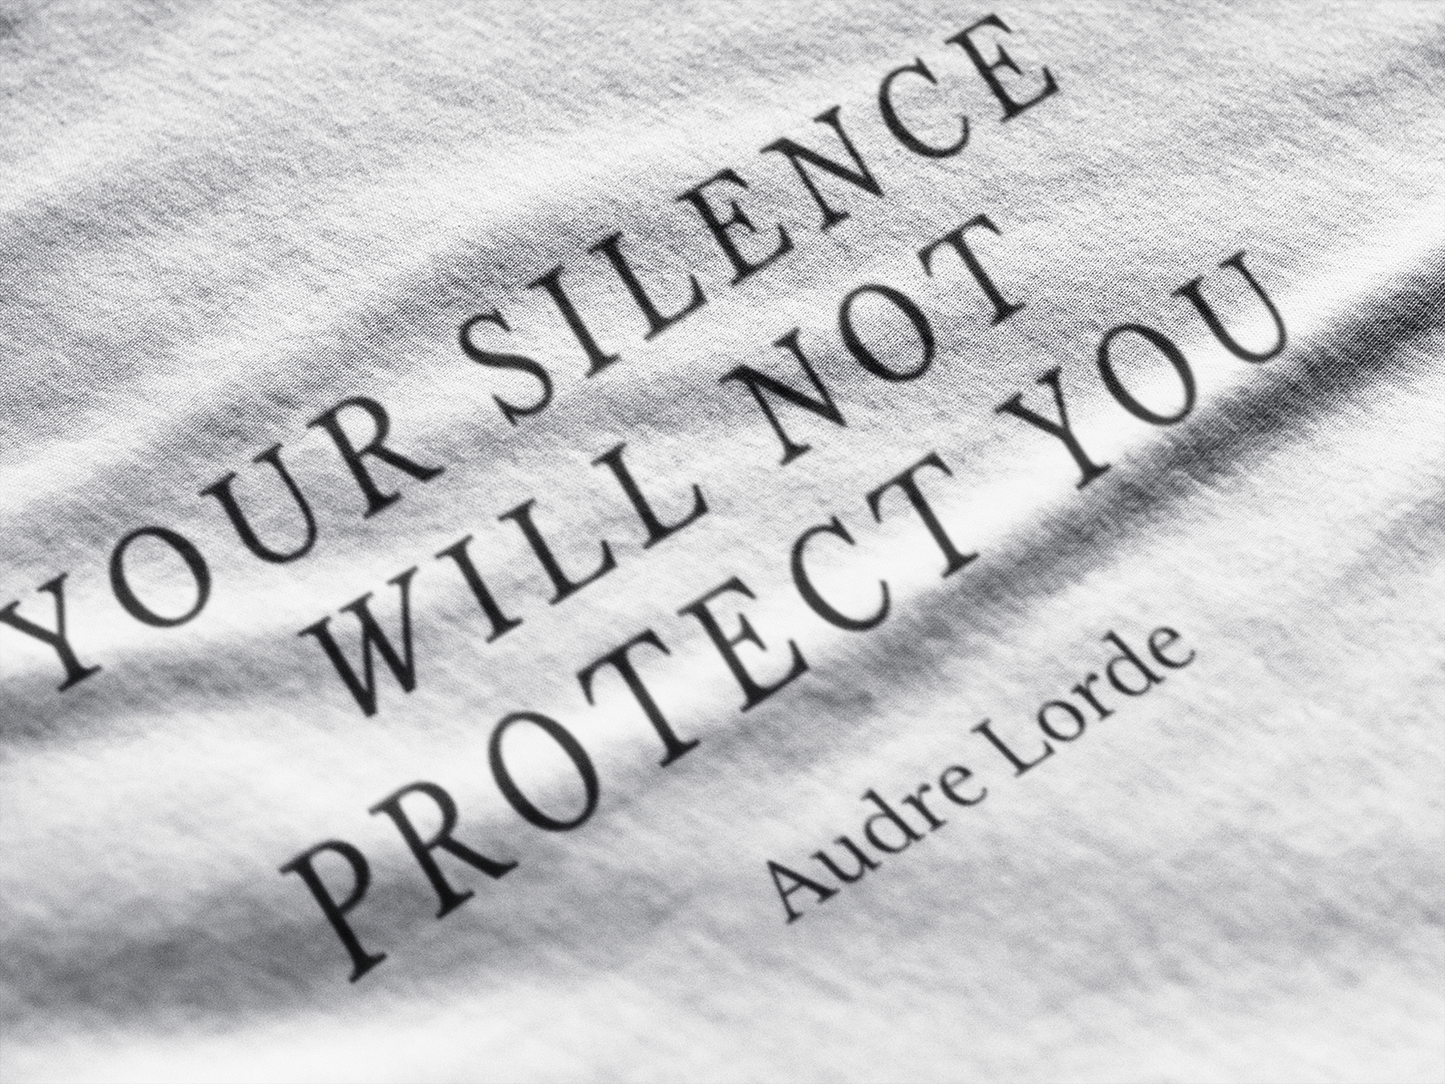 Your Silence Will Not Protect You Audre Lorde t-shirt - Bad Perfectionist Co.